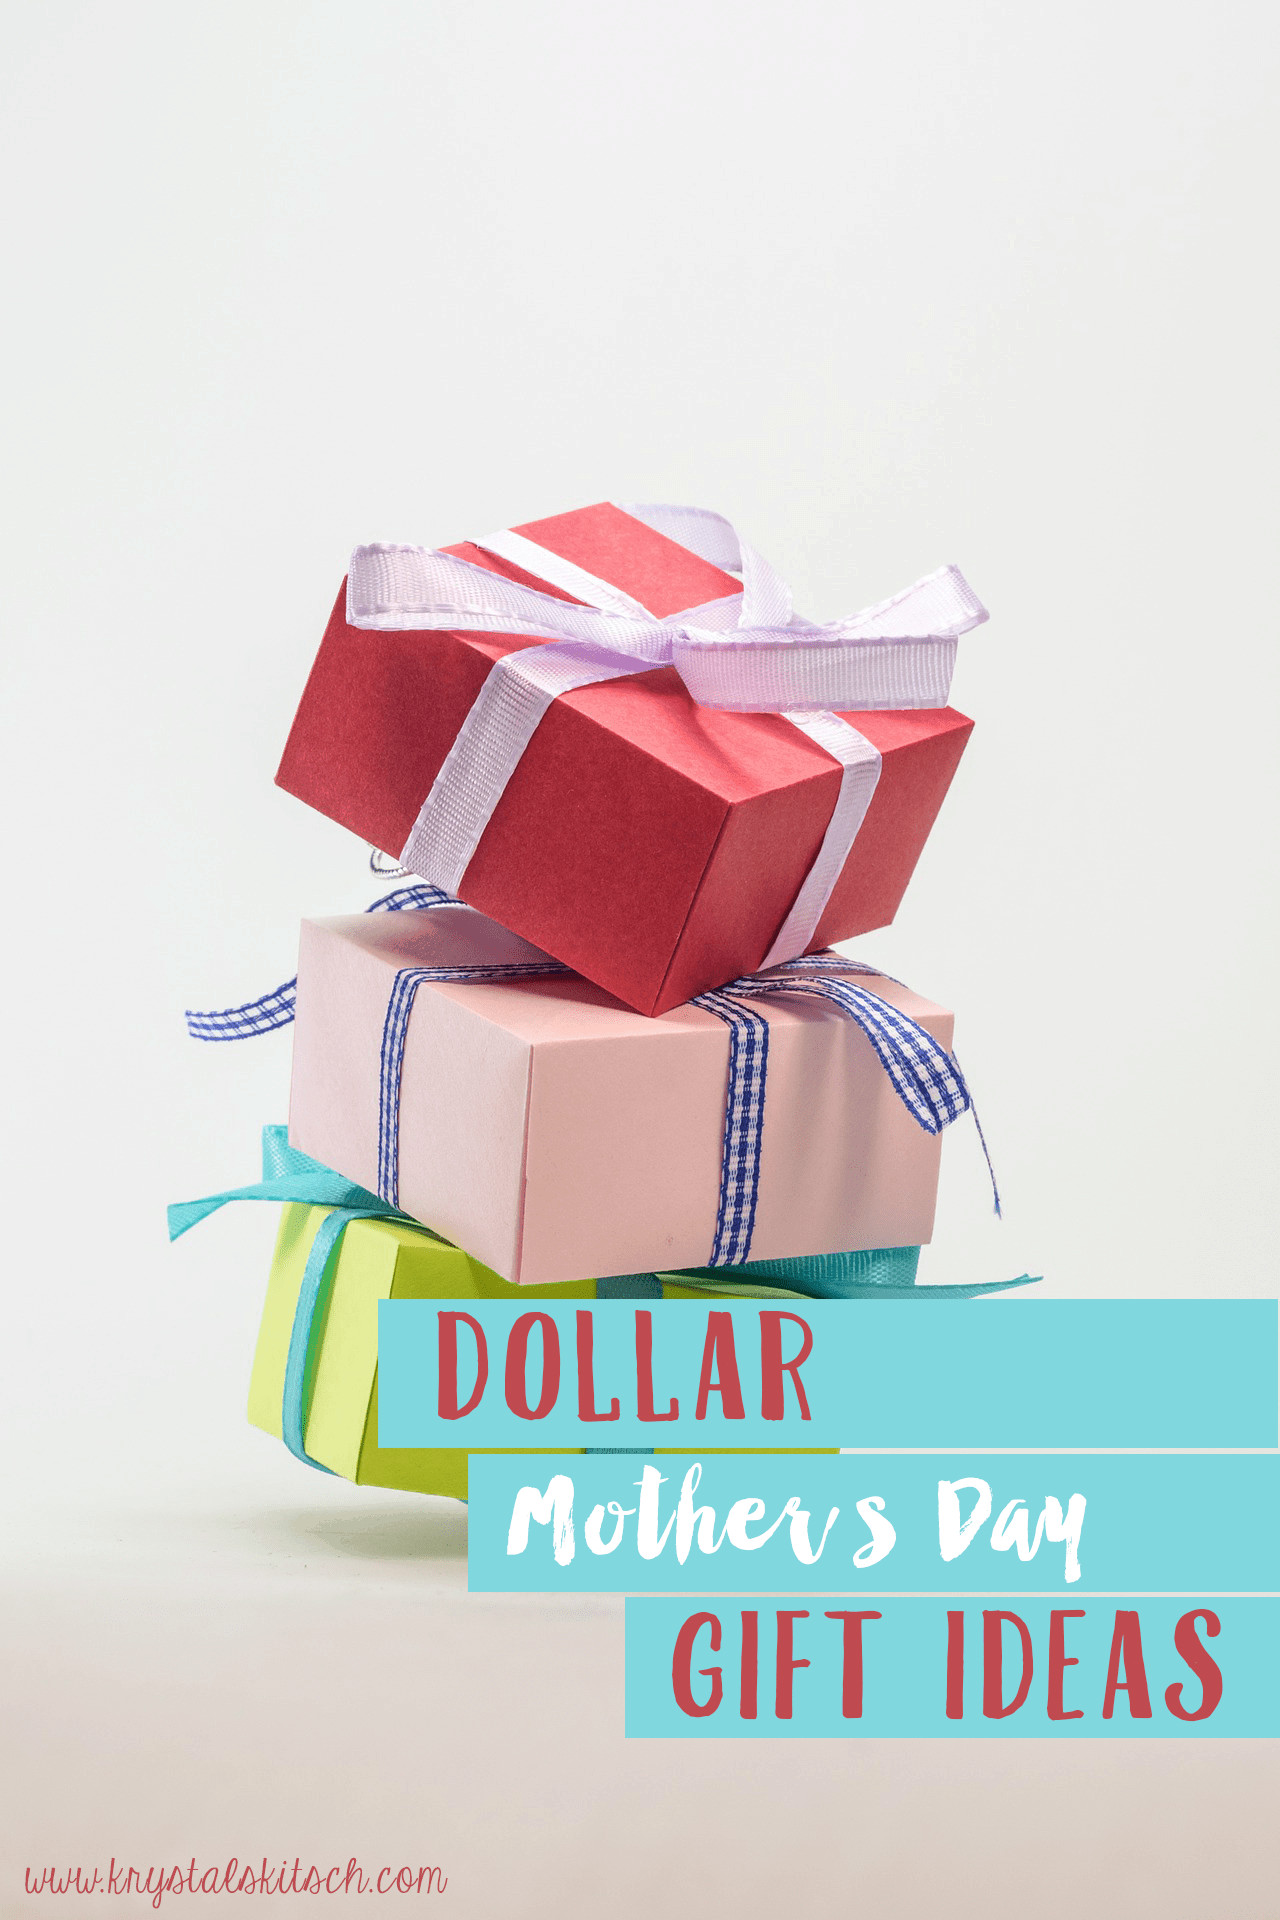 Mother's Day Restaurant Ideas
 Mother s Day Gift Ideas For $1 Sunny Sweet Days